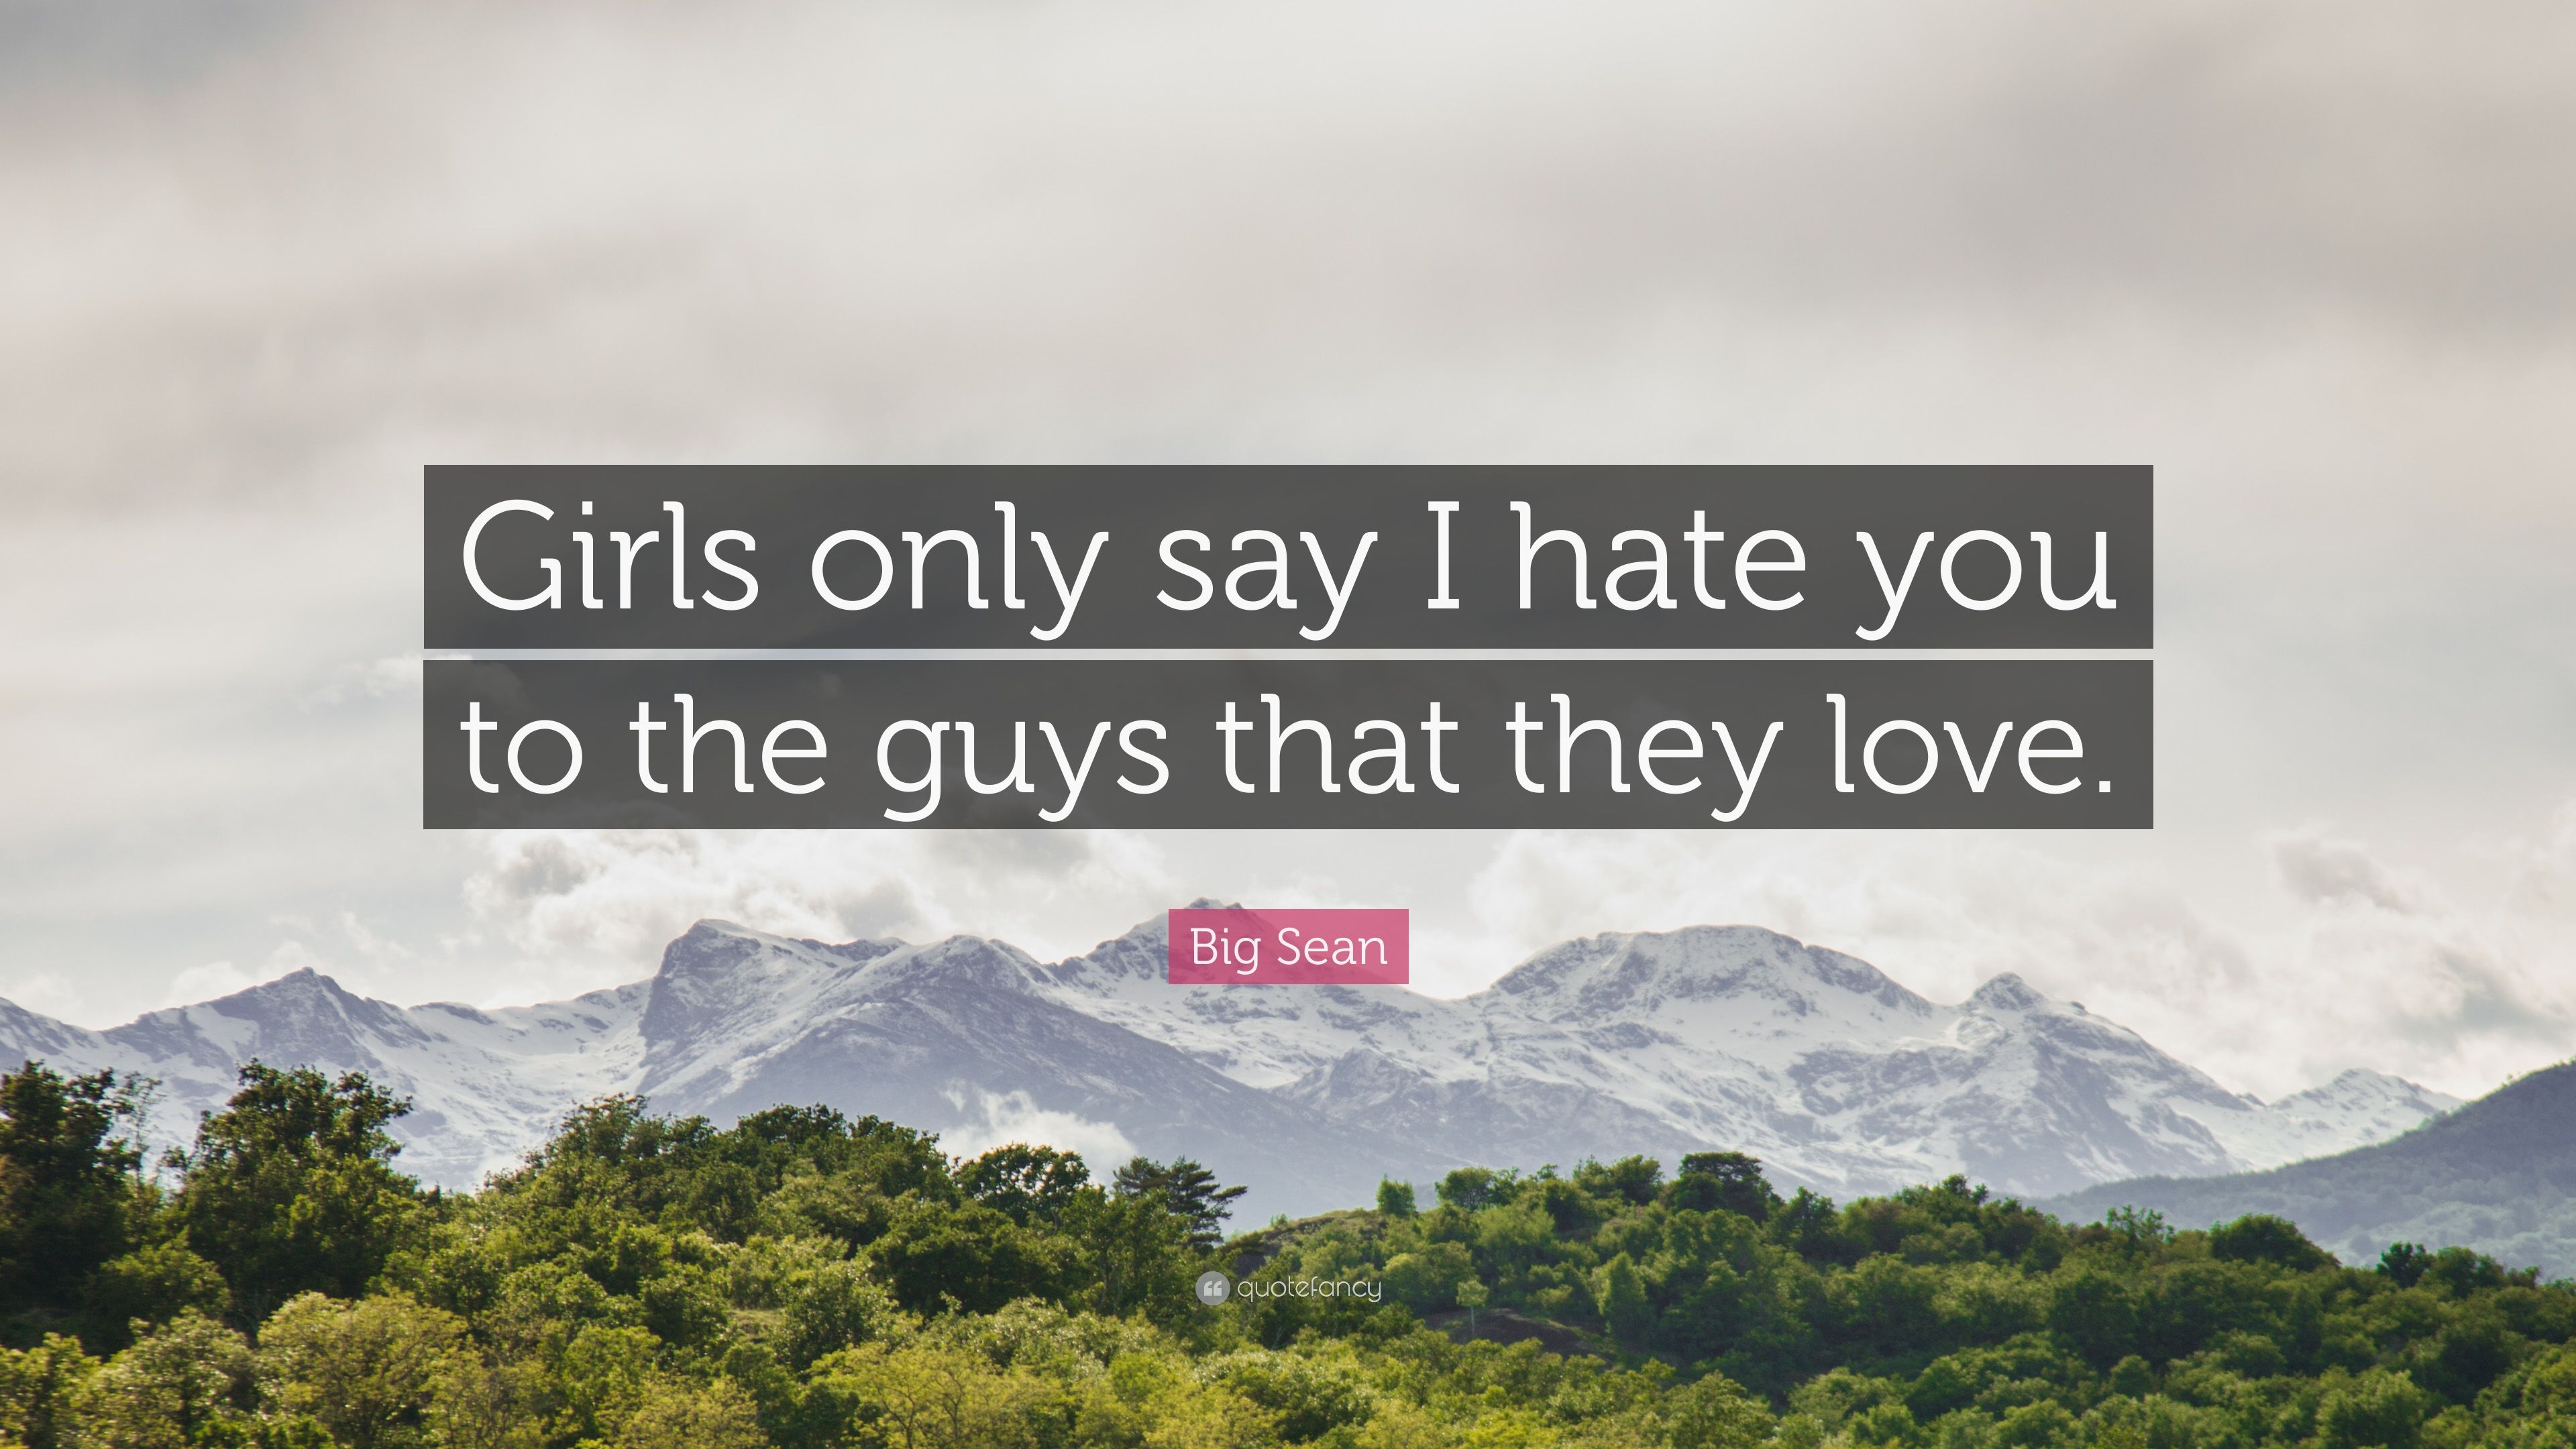 Big Sean Quote: "Girls only say I hate you to the guys that they 